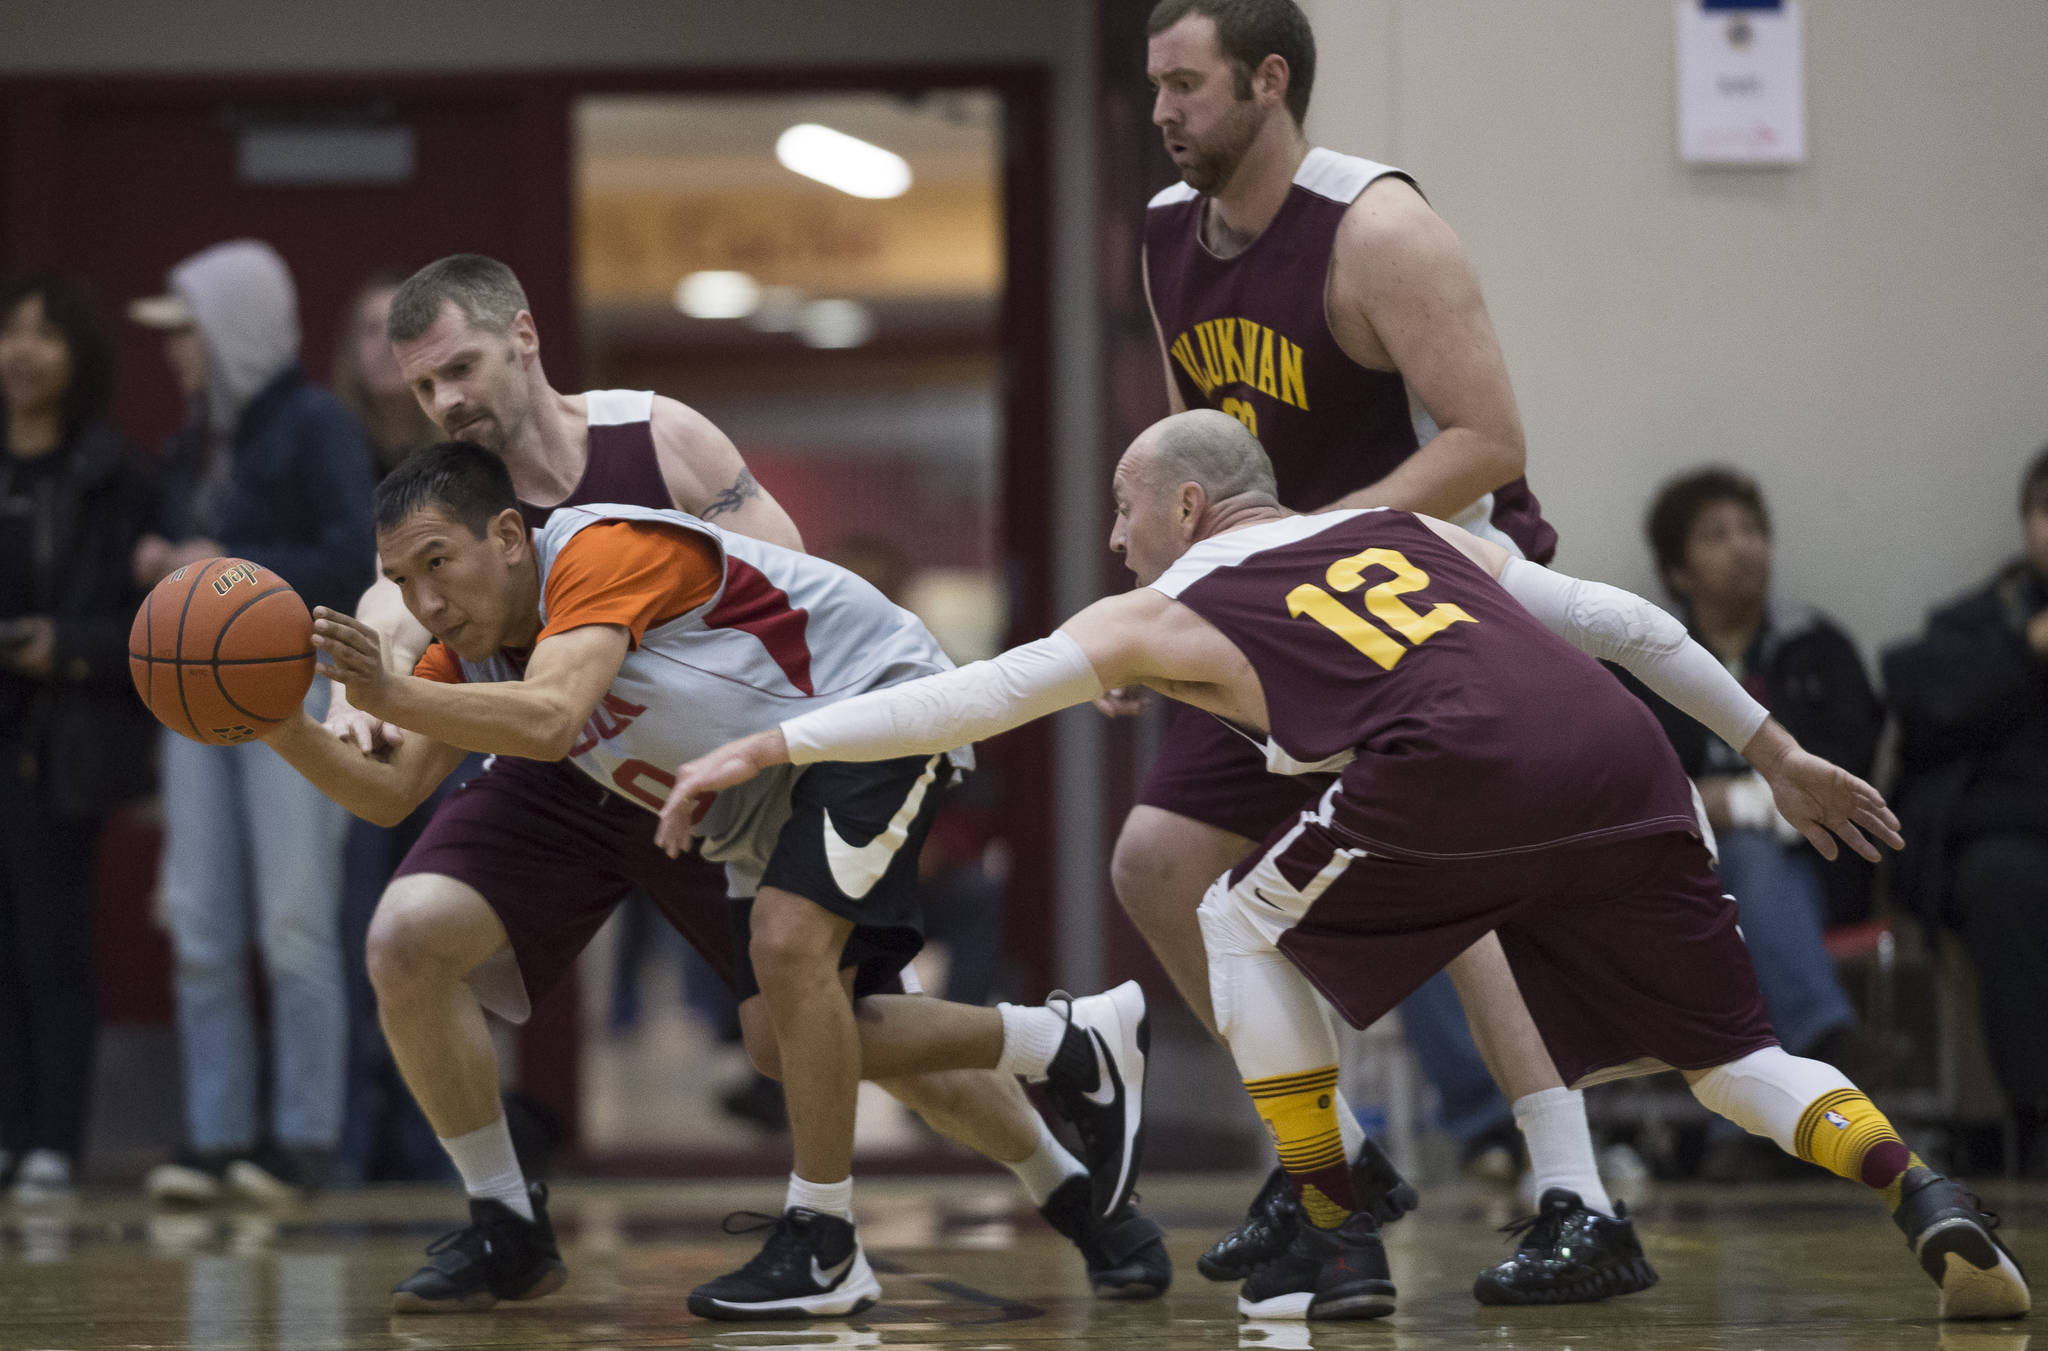 Angoon’s Curtis Lane passes away from Klukwan’s Michael Ganey and Jason Shull in the C bracket final at the Juneau Lion’s Gold Medal Basketball Tournament at Juneau-Douglas High School on Saturday, March 24, 2018. (Michael Penn | Juneau Empire File)